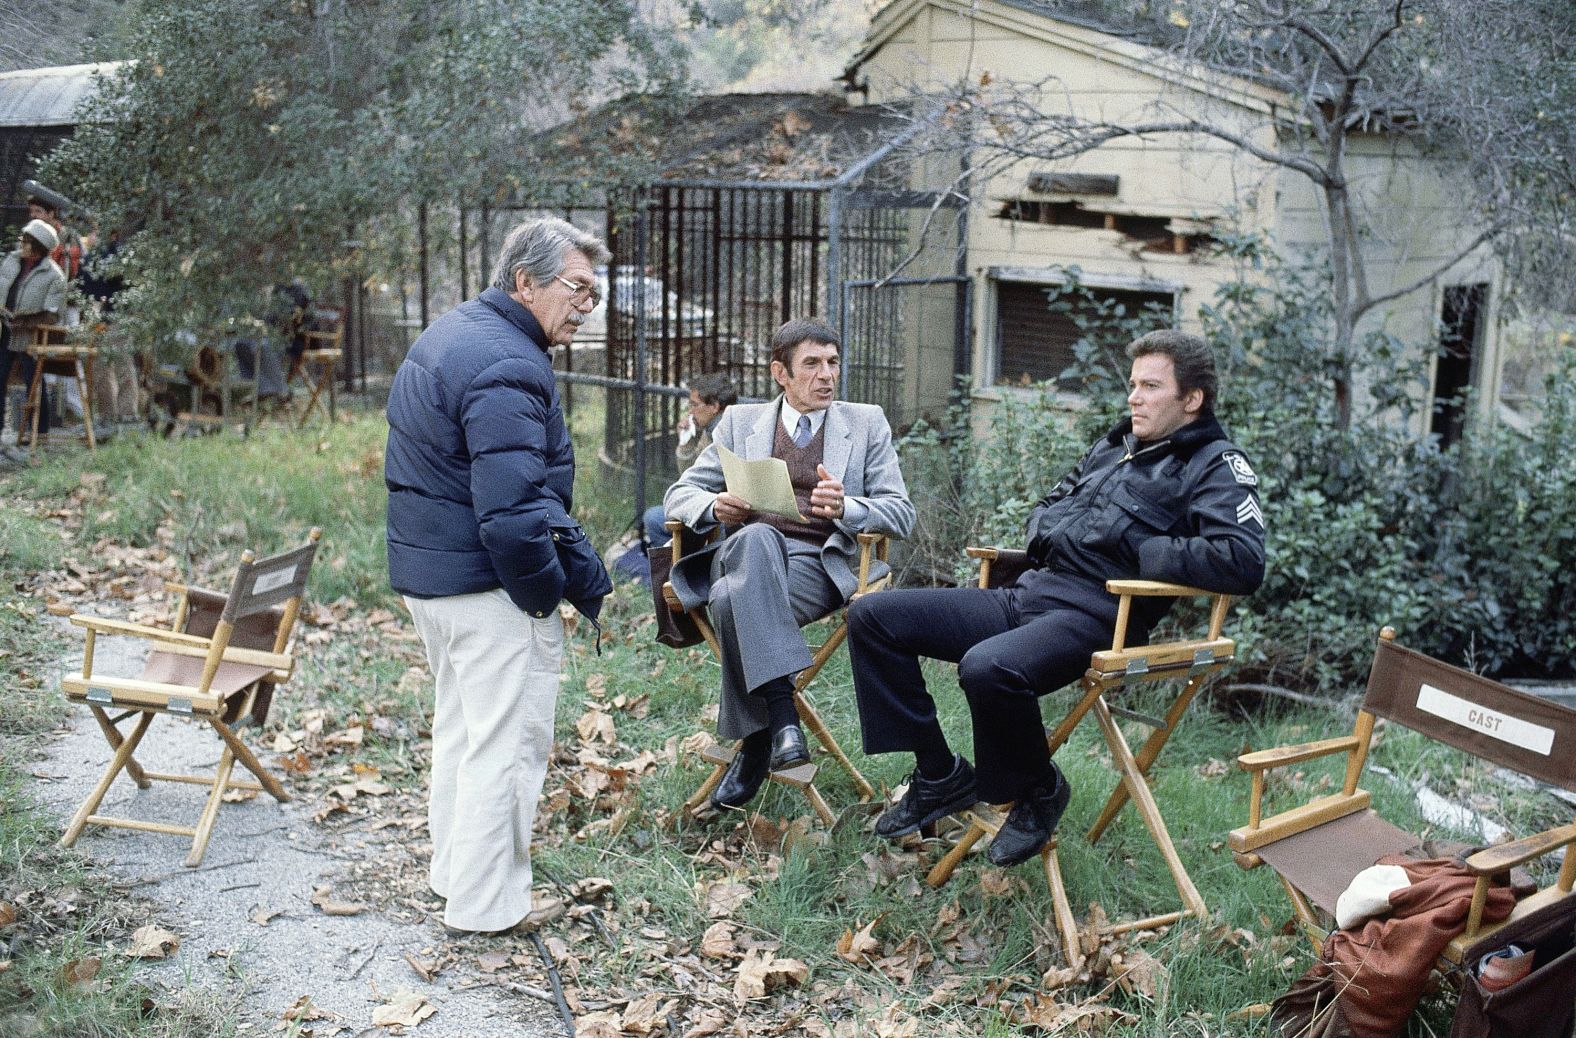 Shatner sits with "Star Trek" co-star Leonard Nimoy while filming the show "T.J. Hooker" in 1982. The police drama ran from 1982-1986.